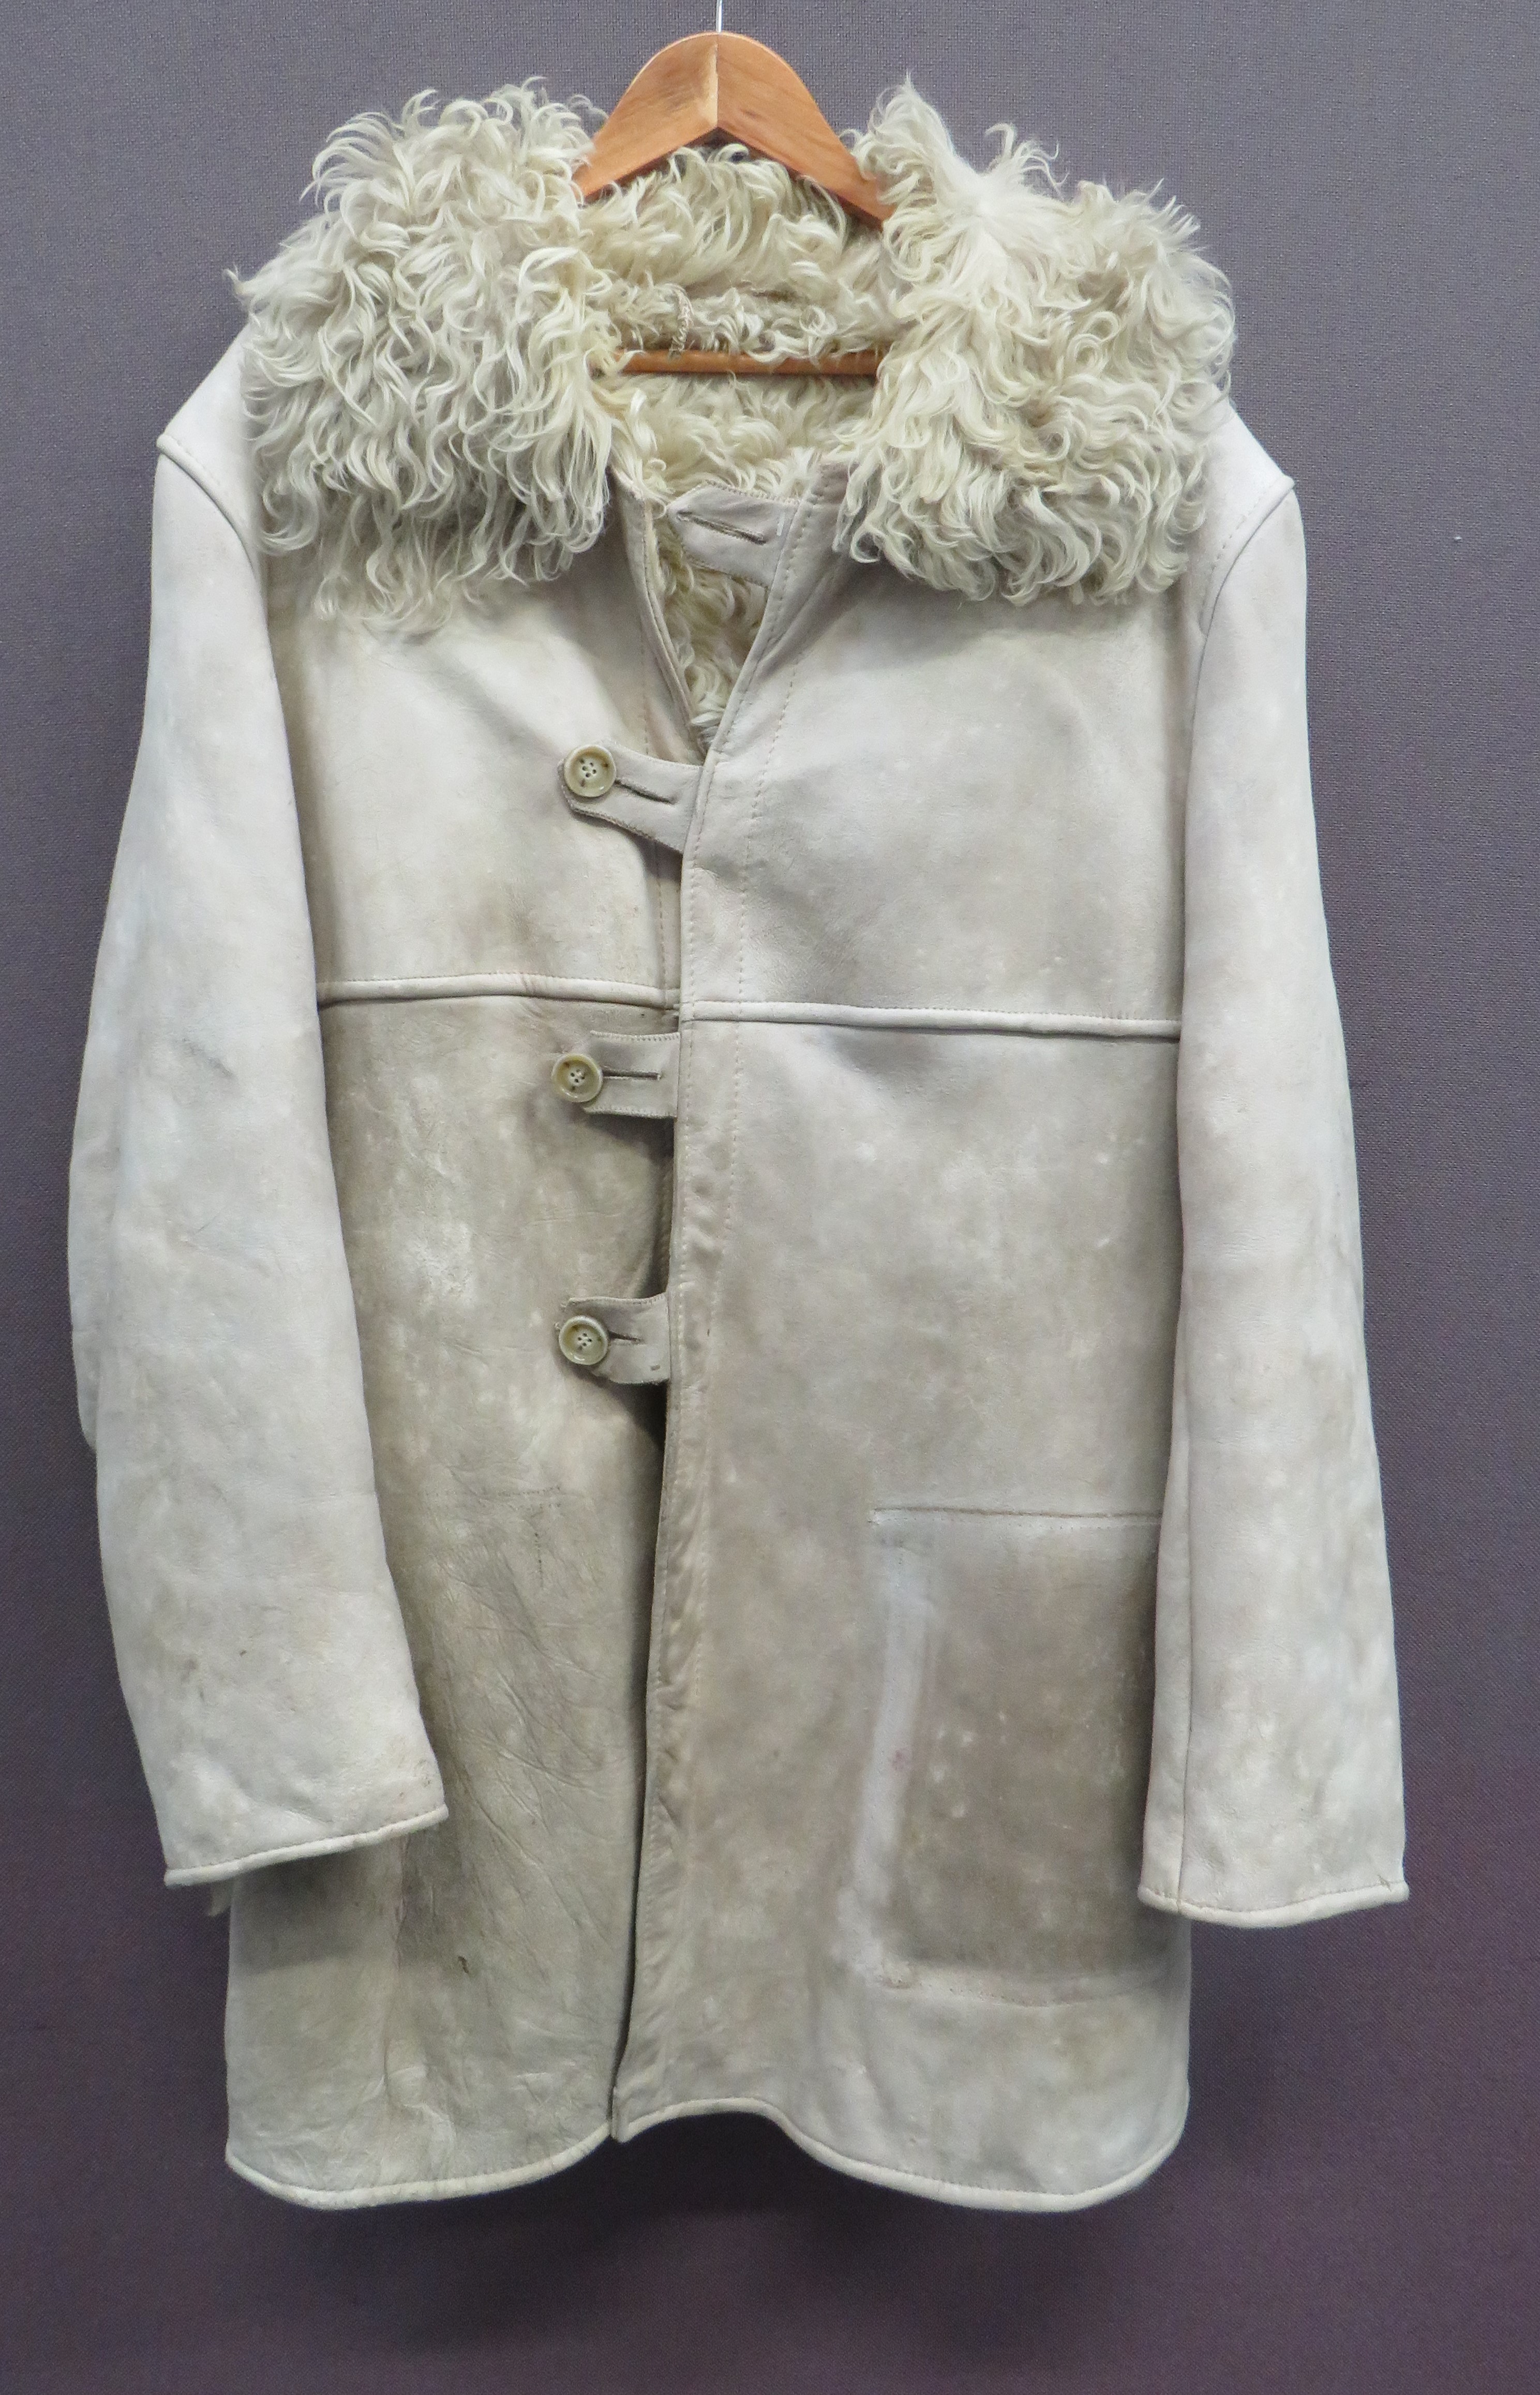 Swedish Cold Weather Coat soft white leather/suede, single breasted, long coat secured by four